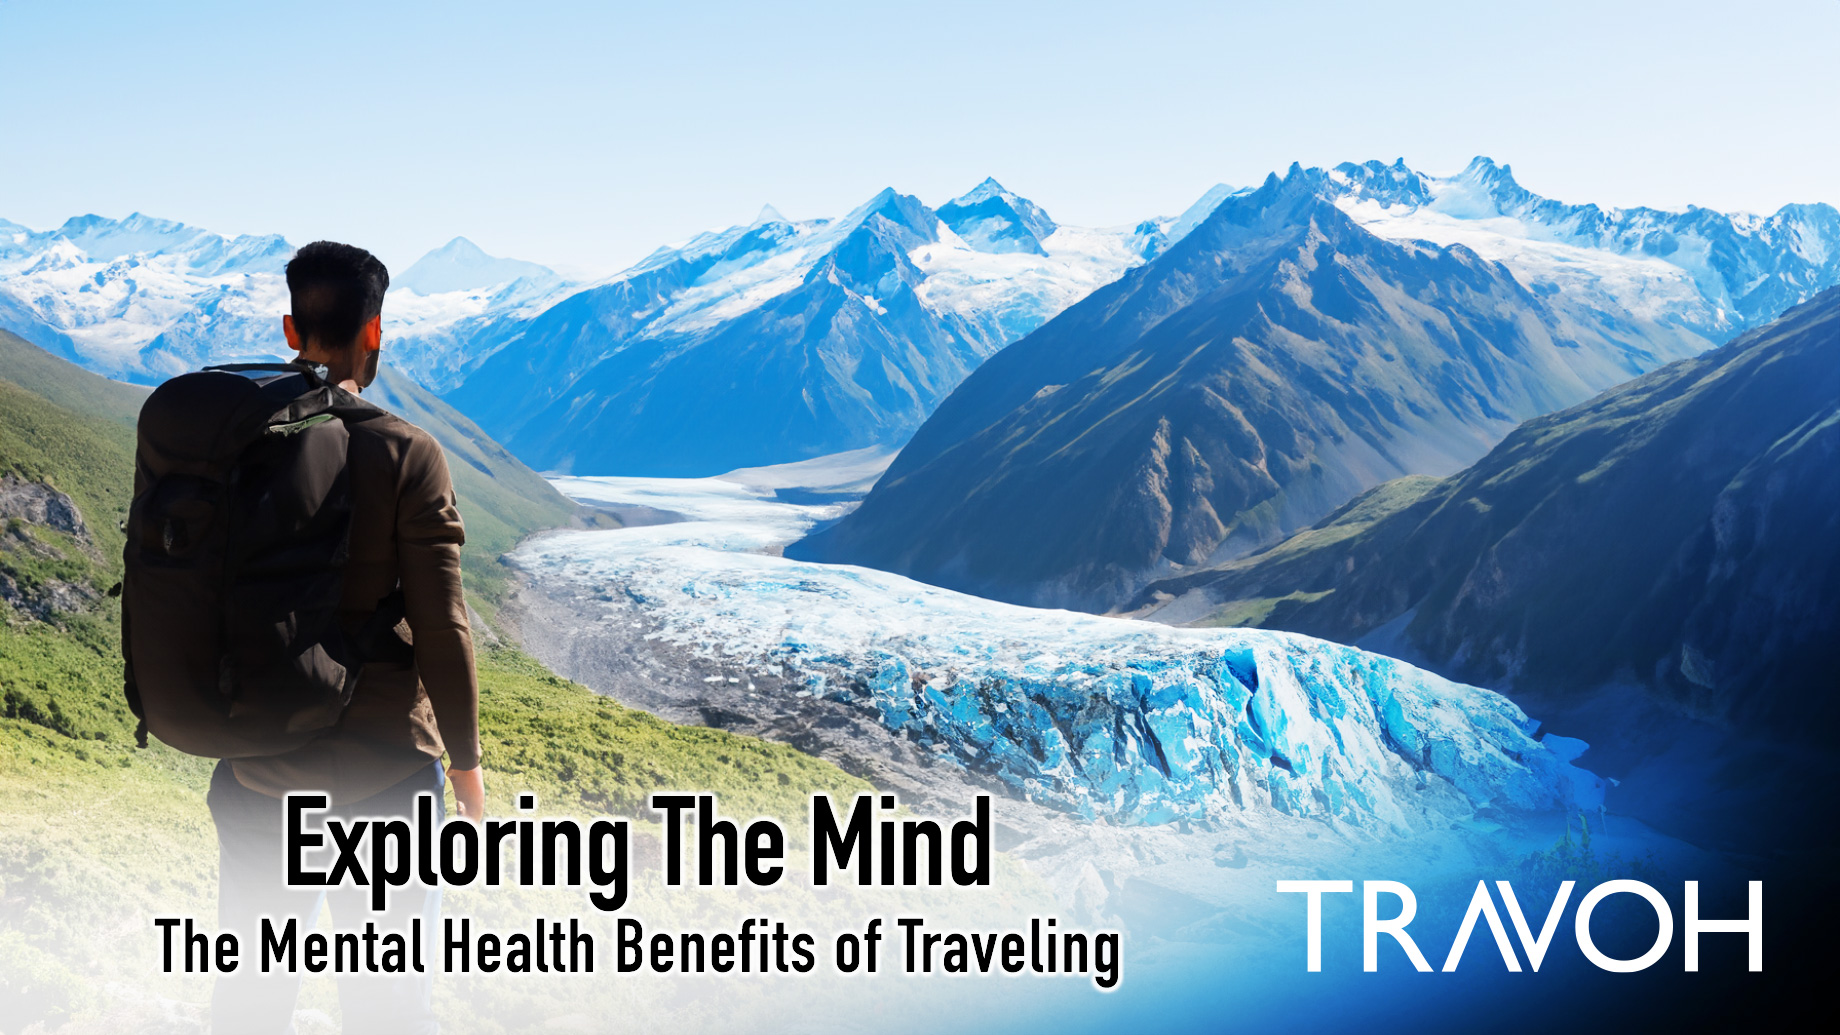 Exploring the Mind - The Mental Health Benefits of Traveling